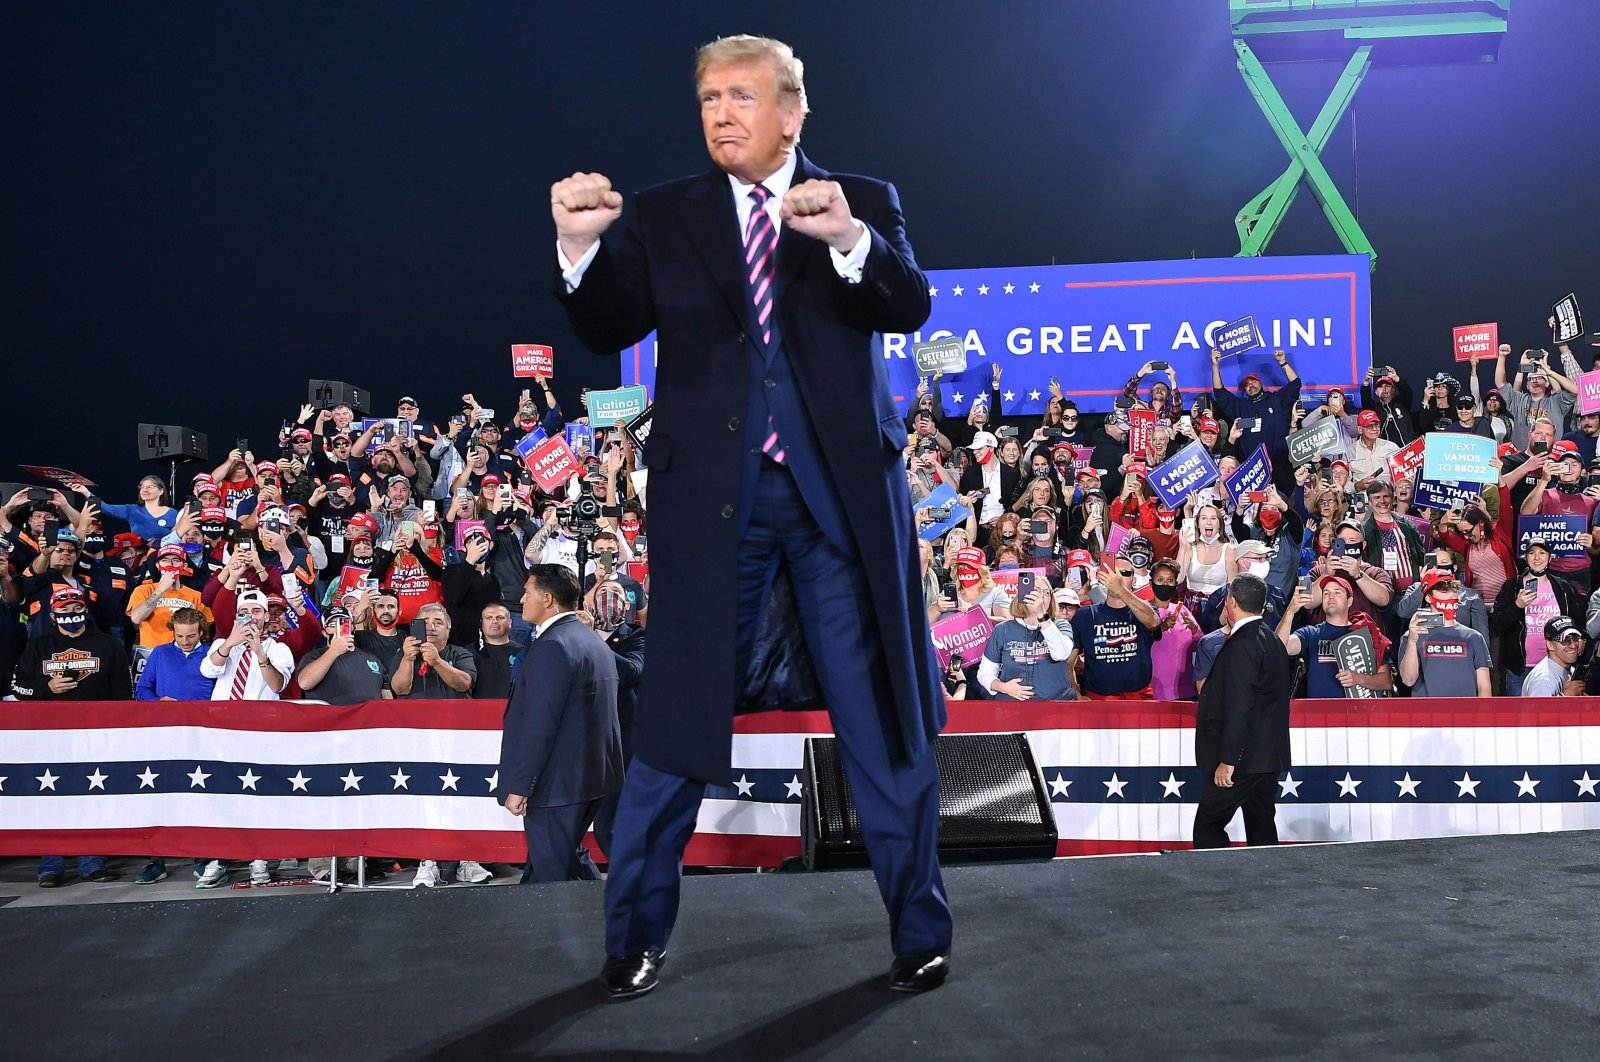 Then-U.S. President Donald Trump arrives for a campaign rally at Pittsburgh International Airport, Pennsylvania, U.S., on Sept. 22, 2020. (AFP Photo)